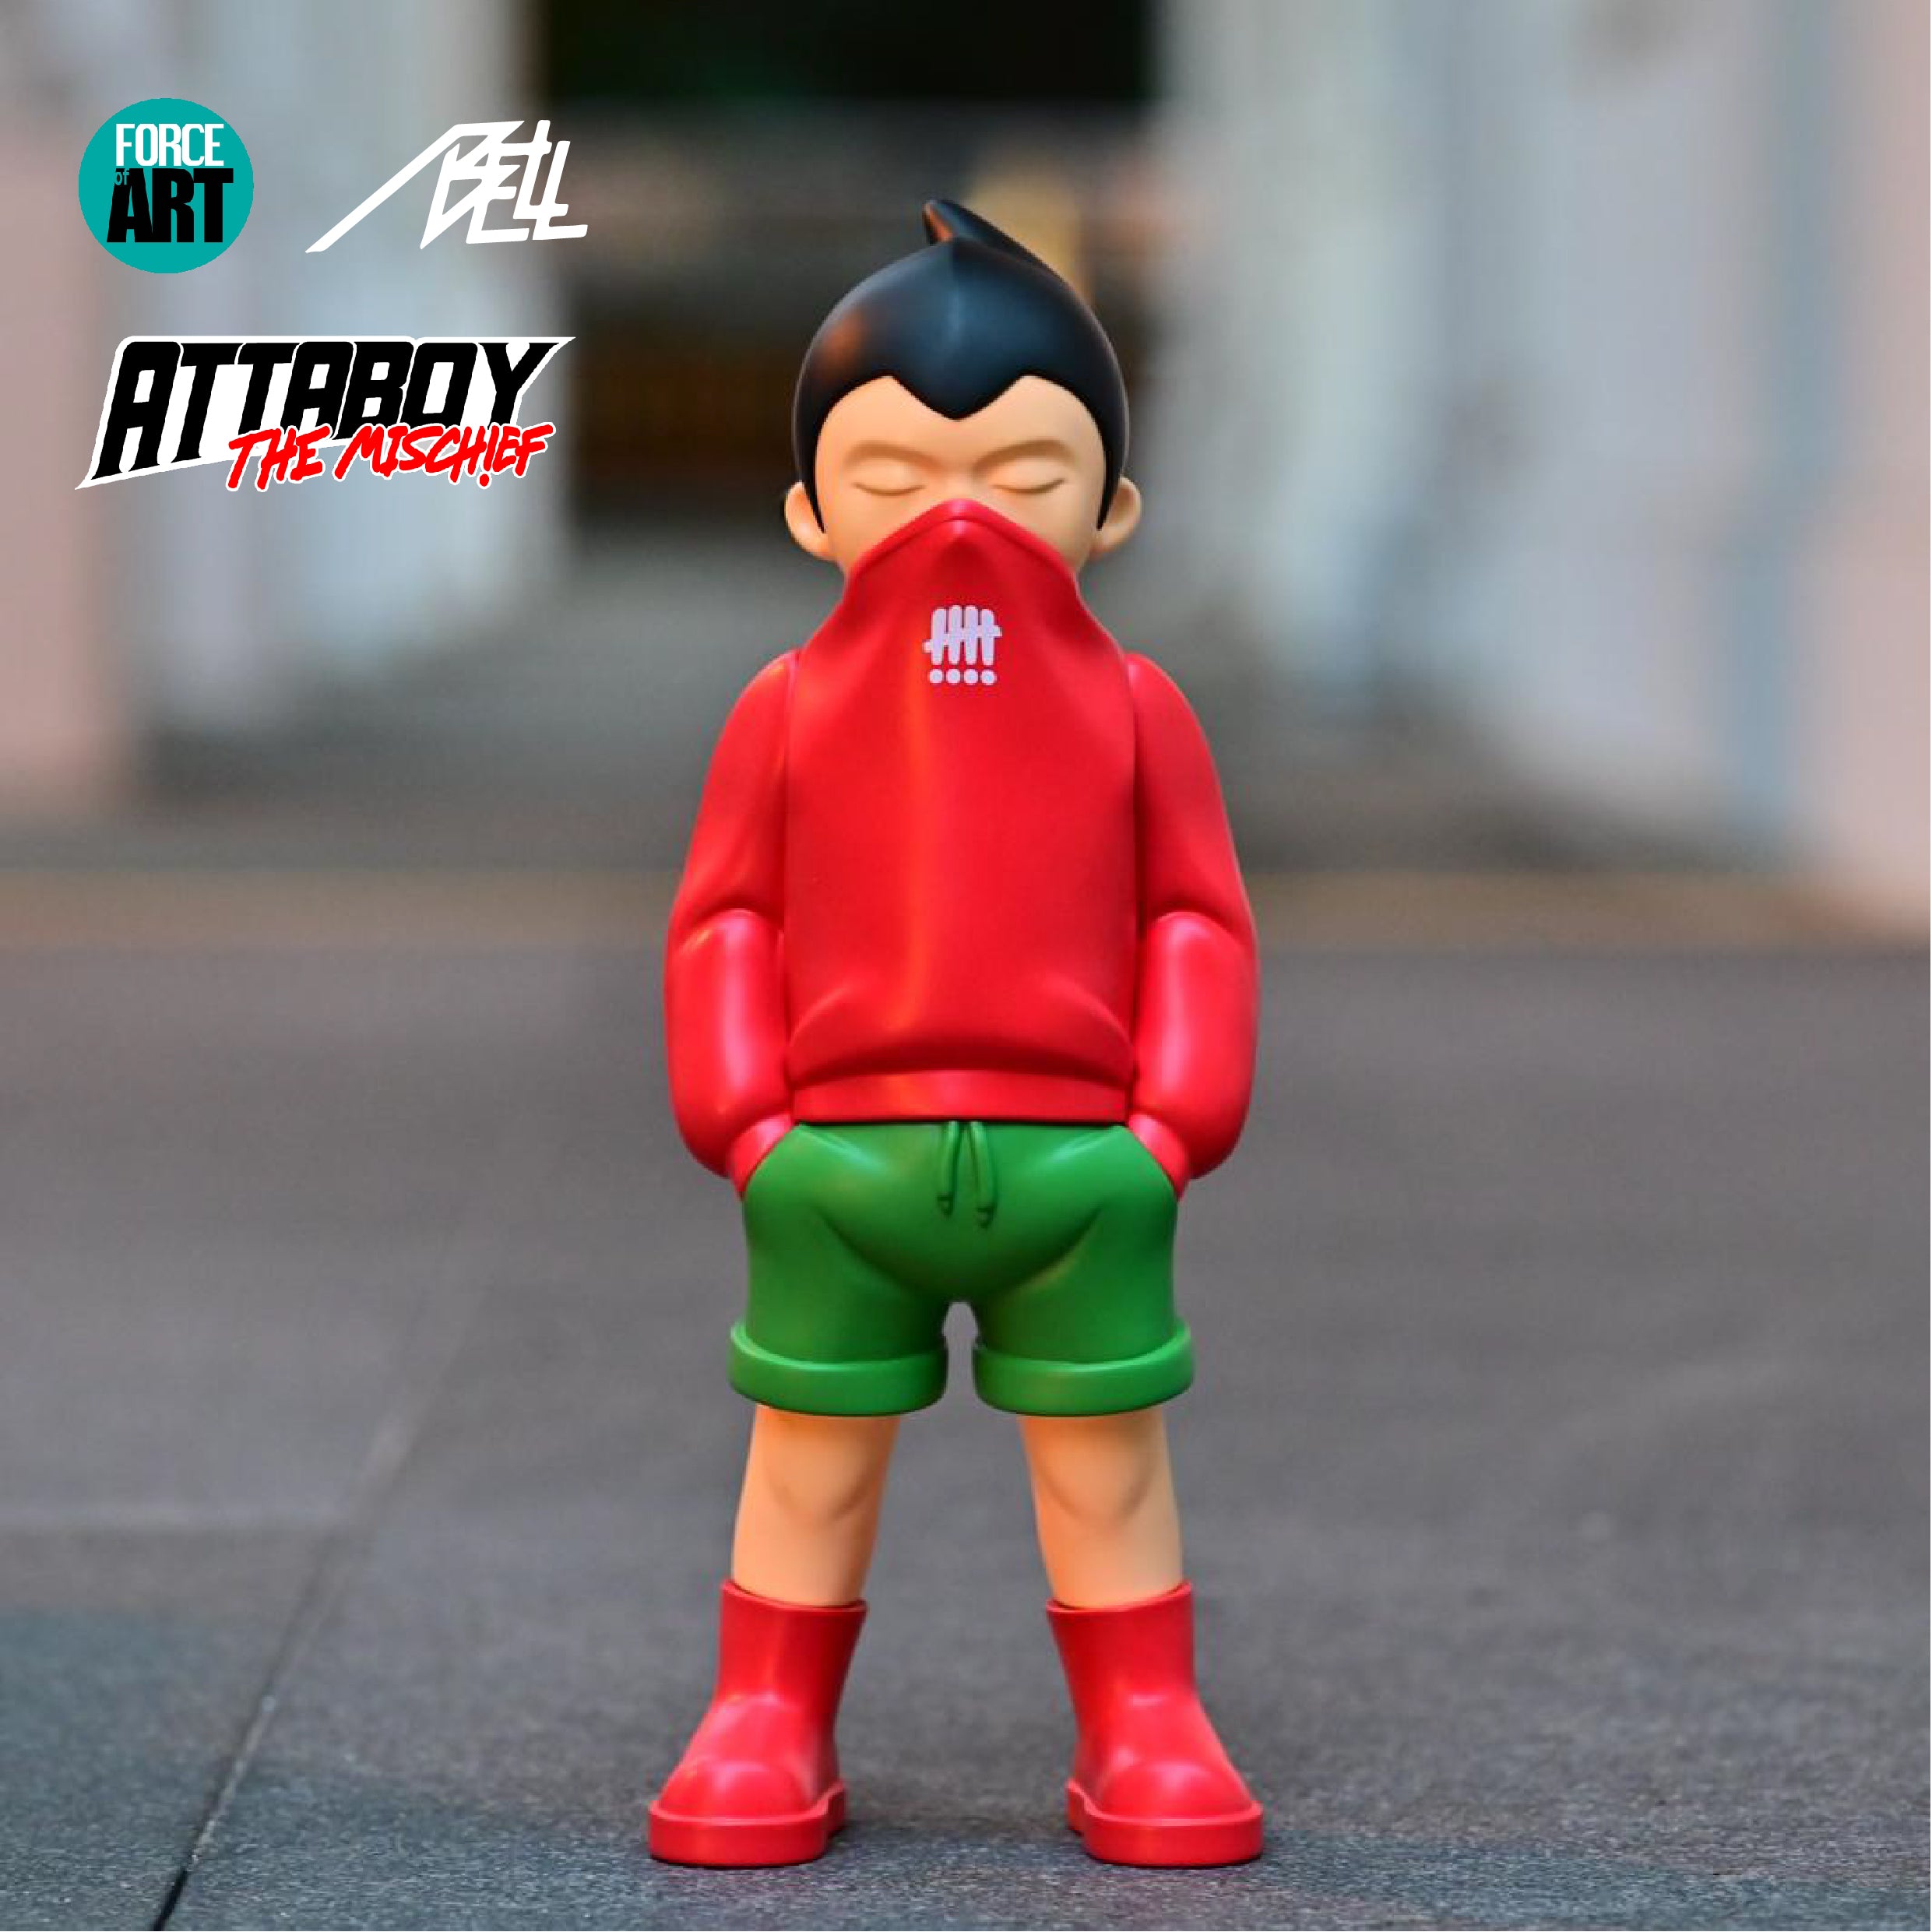 Attaboy by Abell Octovan